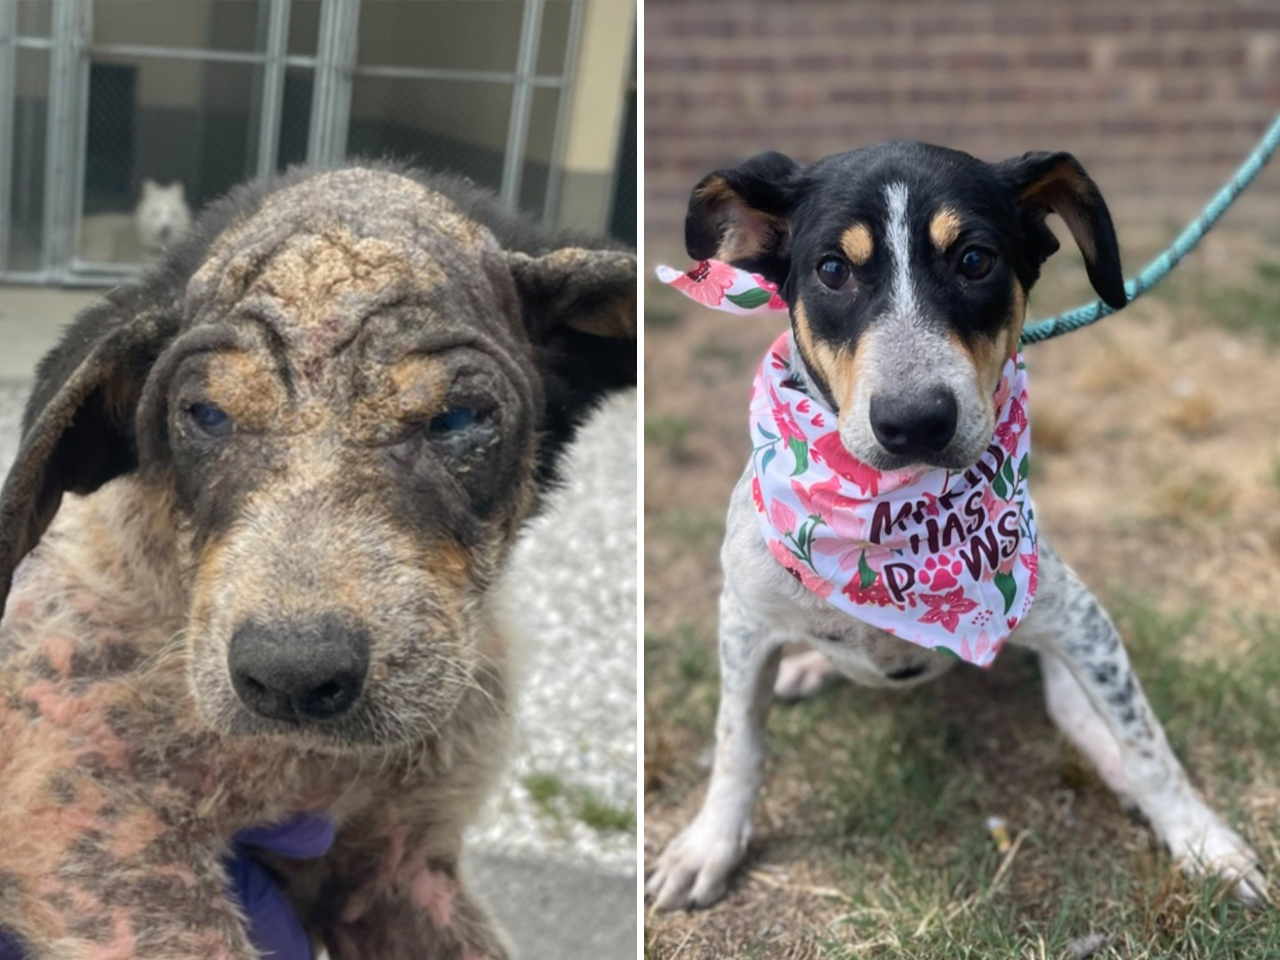 Zen was rescued from a hoarding case. After grooming care, the 6-month-old pup went from sick to spunky in no time. As her name implies, she is a happy and relaxed girl ready for her forever home.